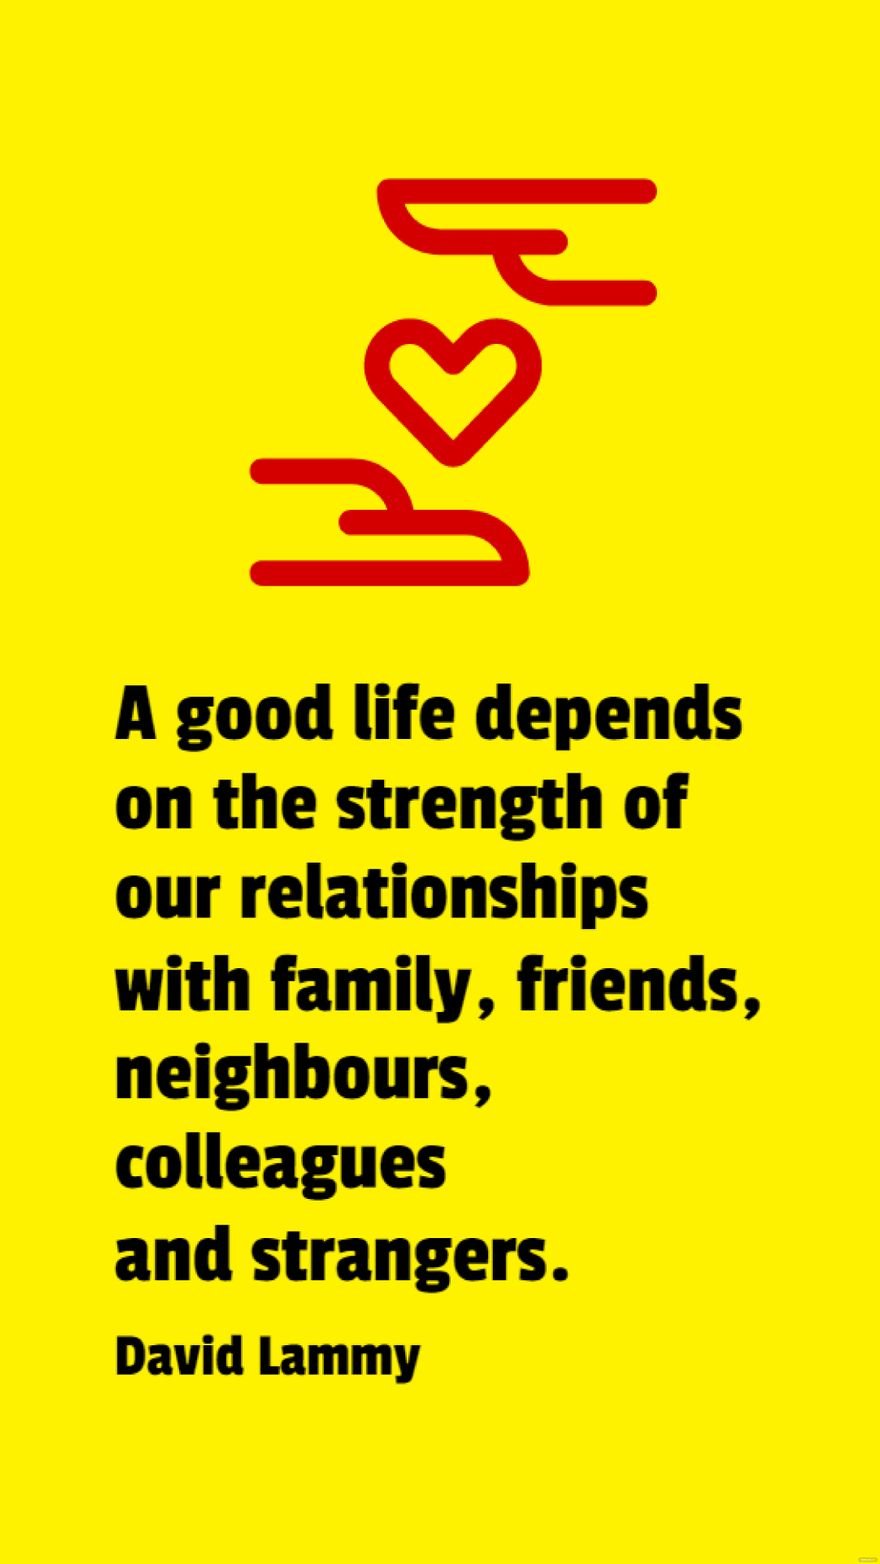 David Lammy - A good life depends on the strength of our relationships with family, friends, neighbours, colleagues and strangers.